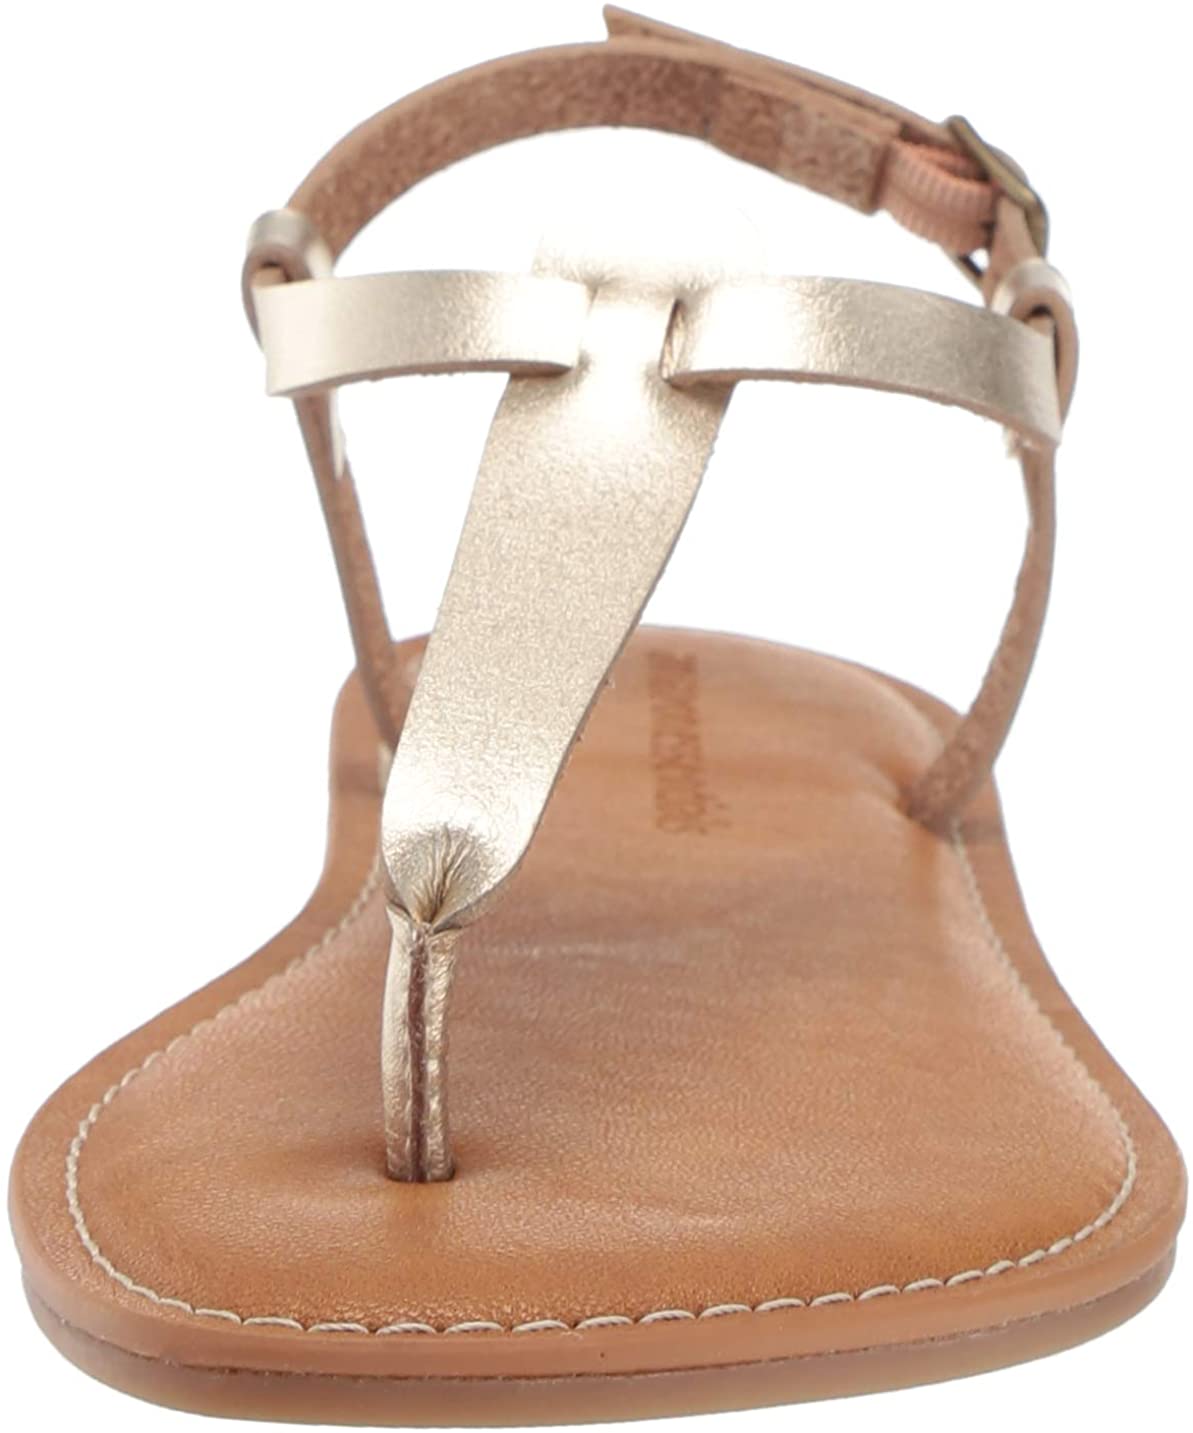 Essentials Women's Casual Thong with Ankle Strap Sandal 